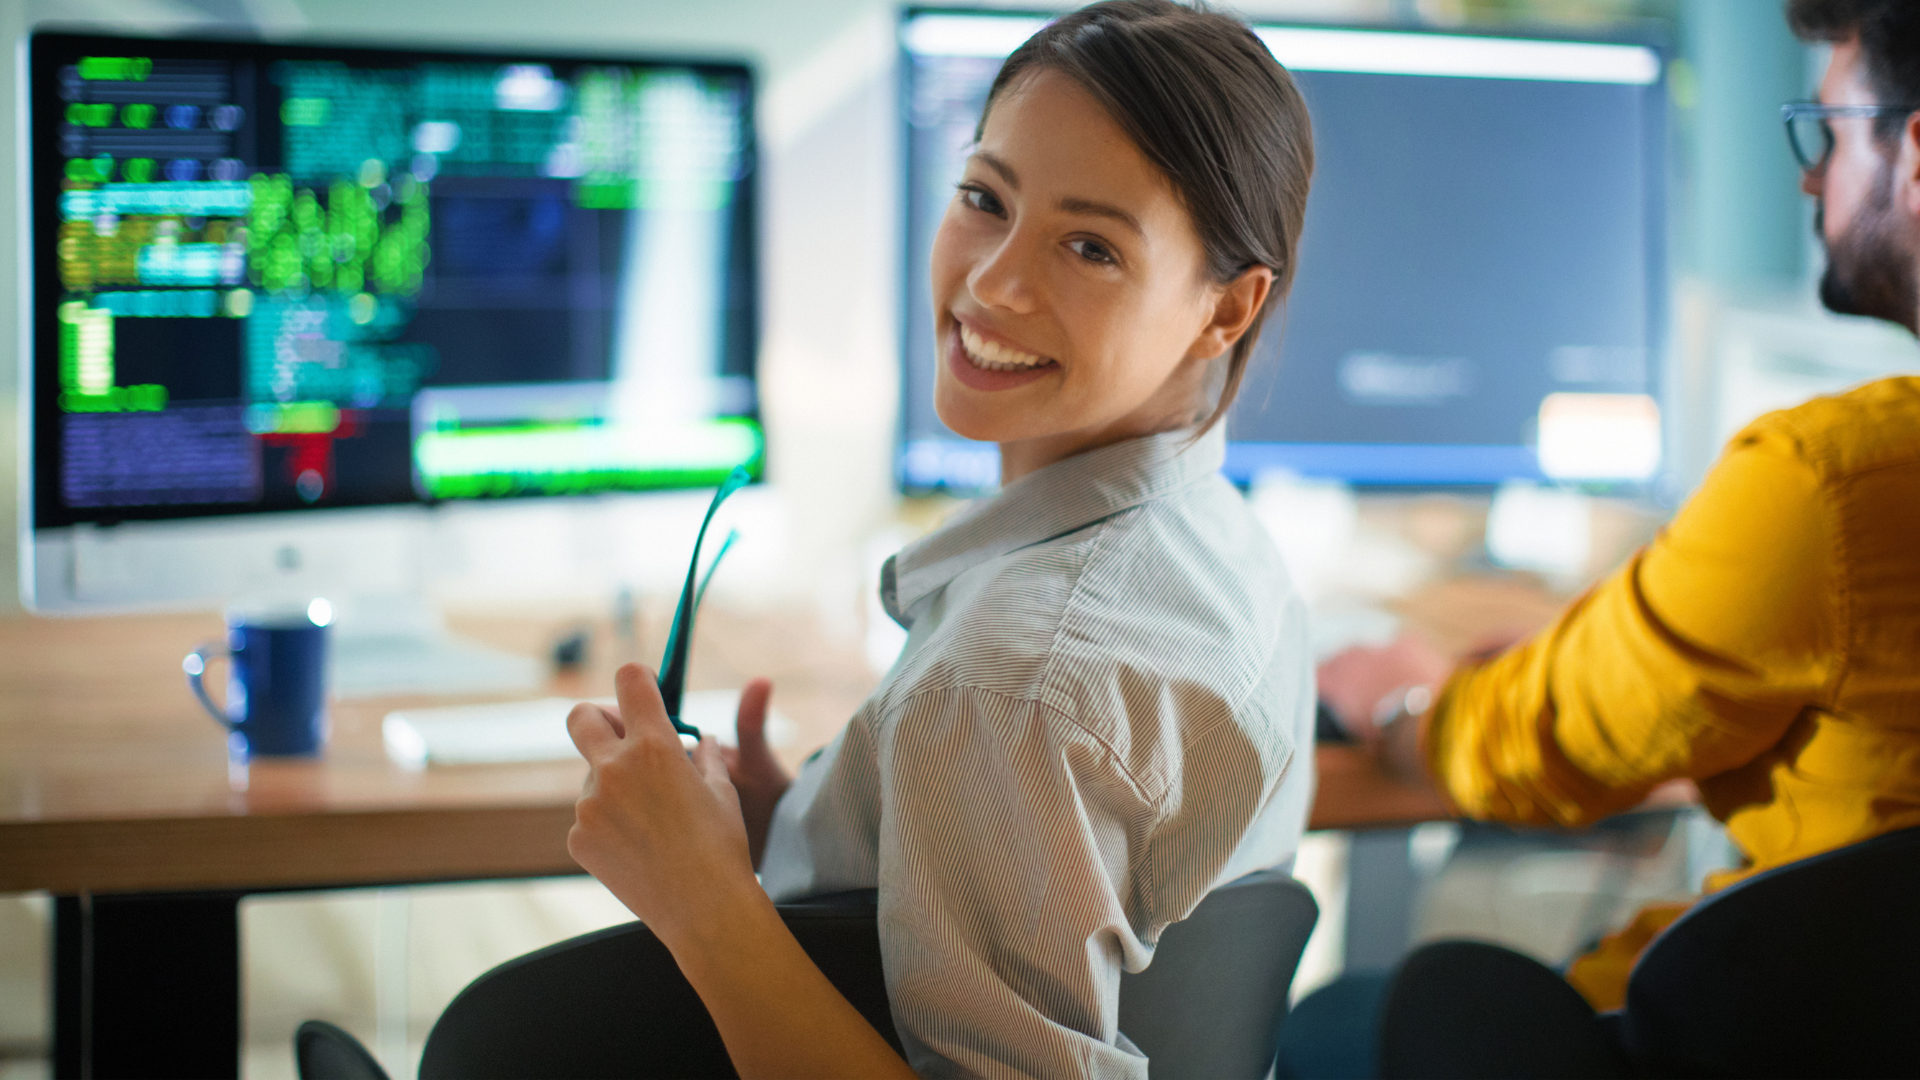 Stock image depicting an IT professional